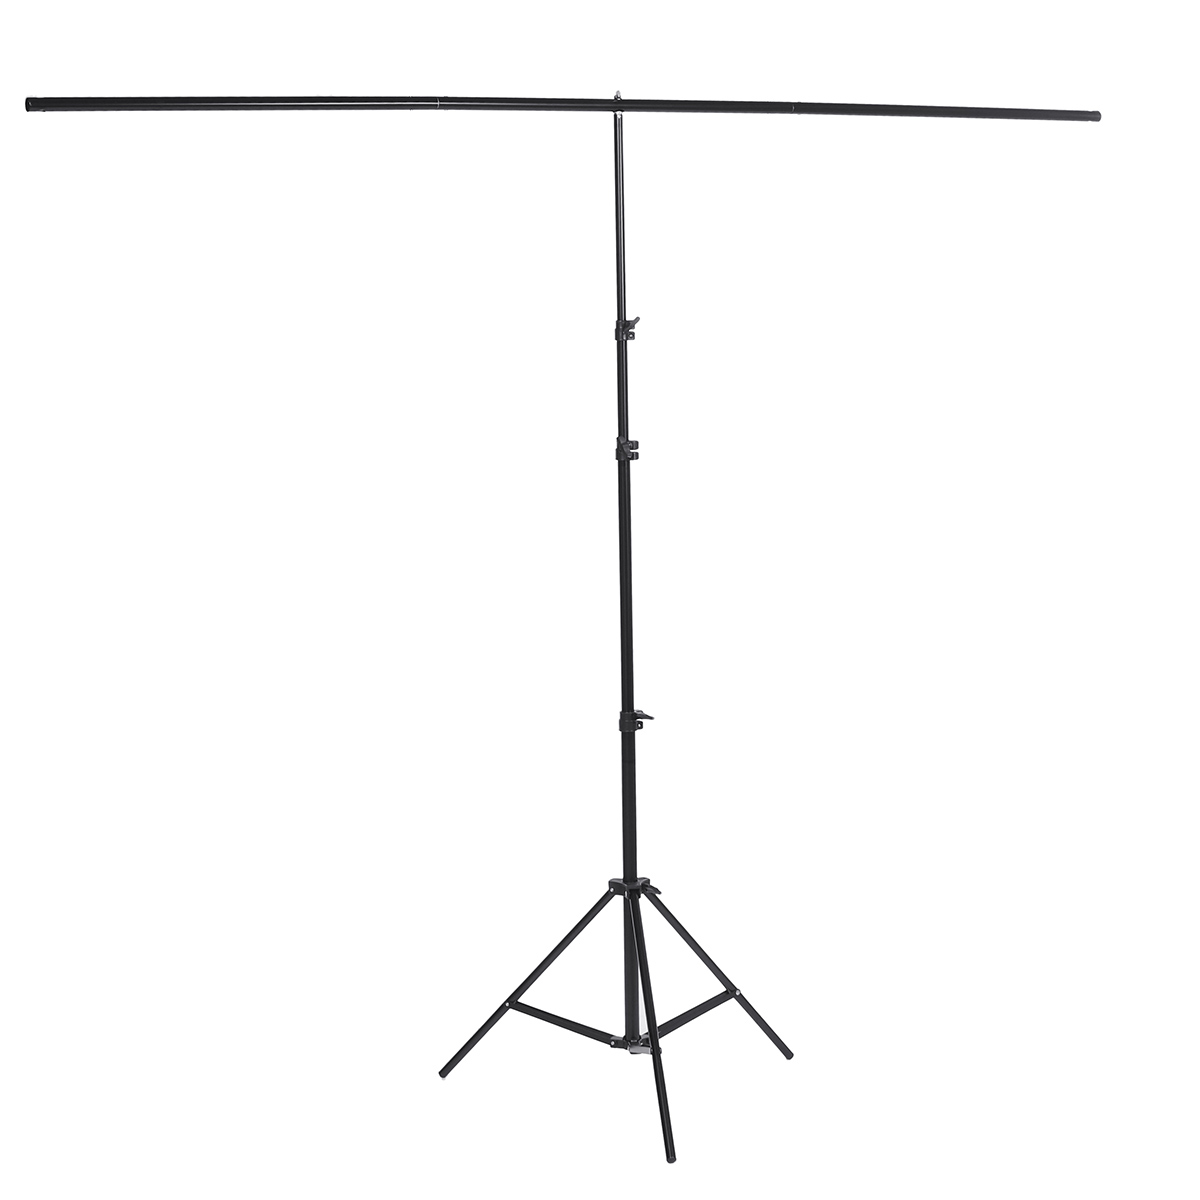 2x26m-Small-Portable-T-type-Adjustable-Background-Support-Stand-Holder-Backdrop-Photography-1759956